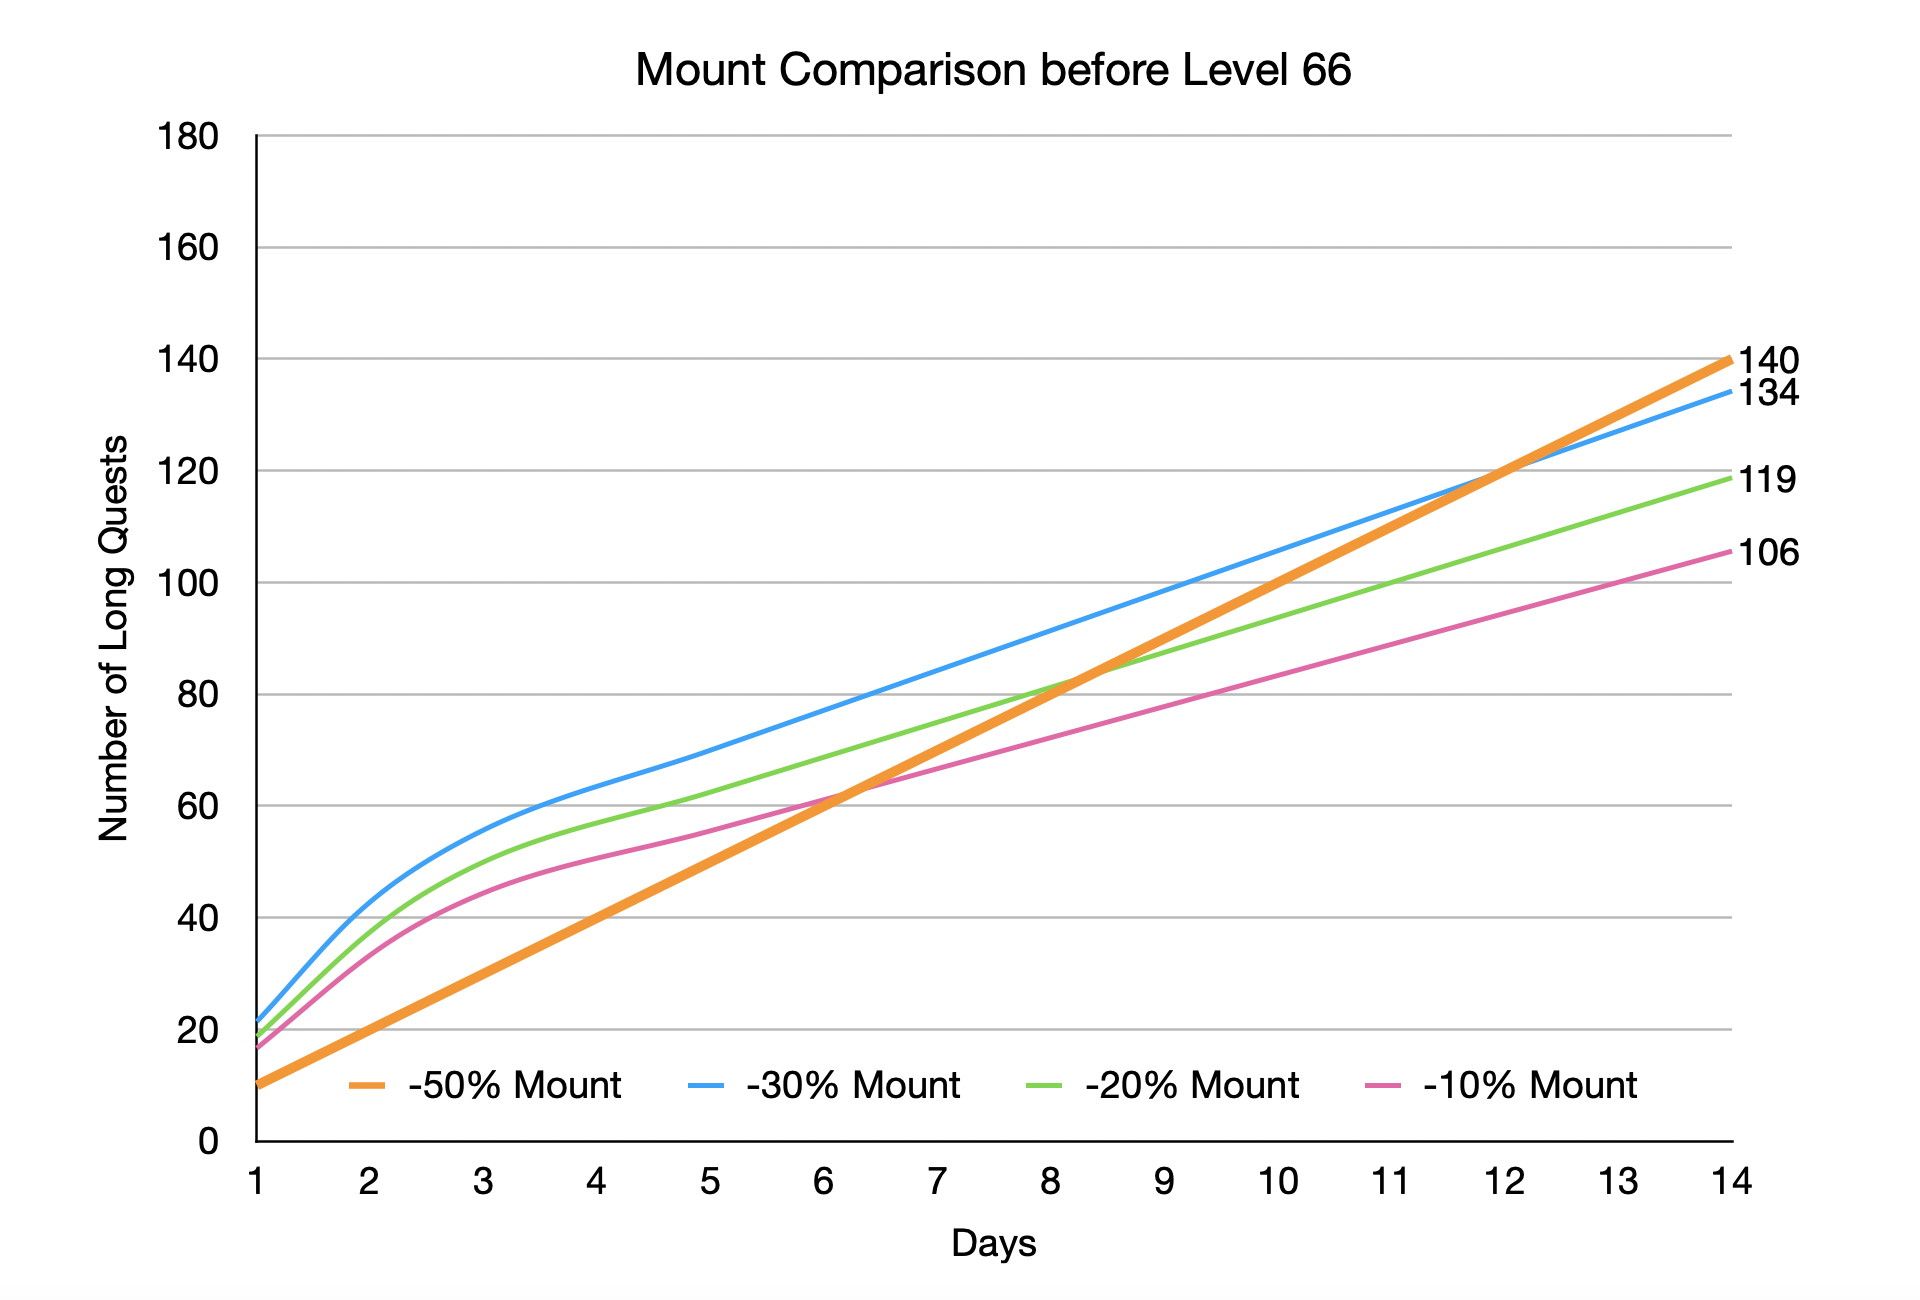 Shakes and Fidget: Diagram Mounts in Comparison - What is the best mount? (pre level 66)